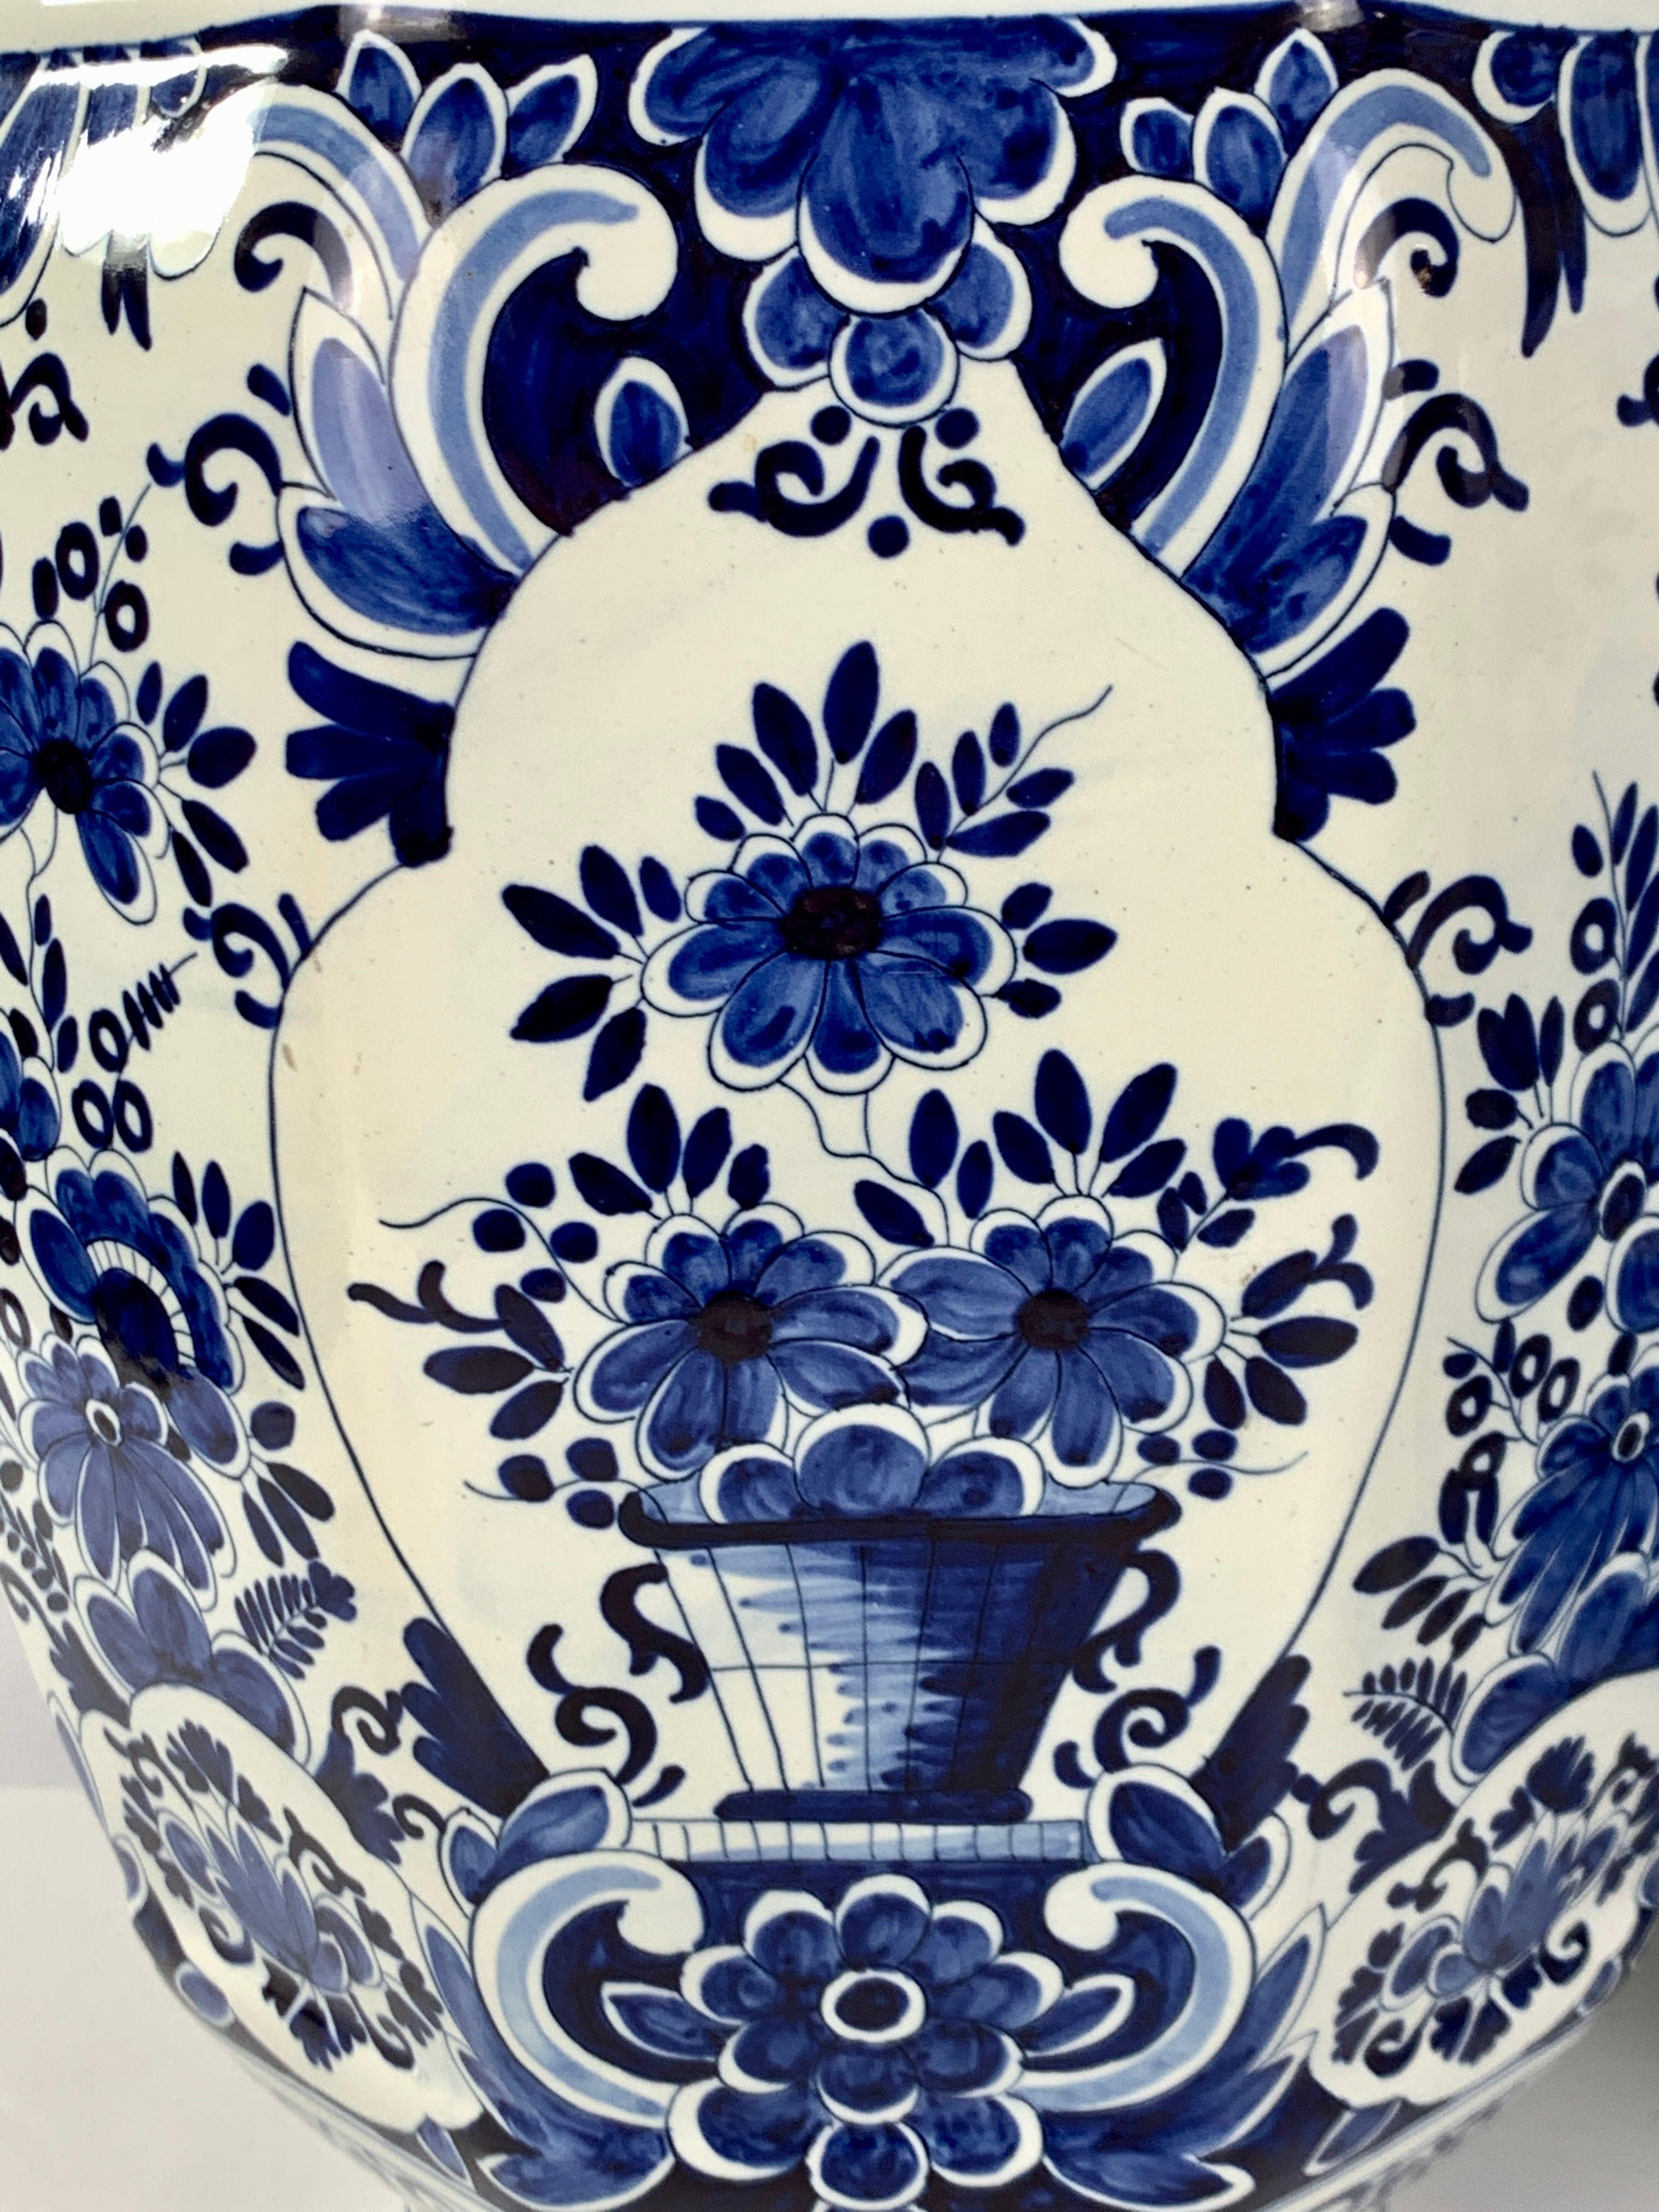 This pair of large Delft jars has a traditional blue flower decoration painted on a white tin-glaze ground.
Each jar is hand-painted, showing beautiful flowers.
The shoulders and cover were decorated in a traditional style with floral panels